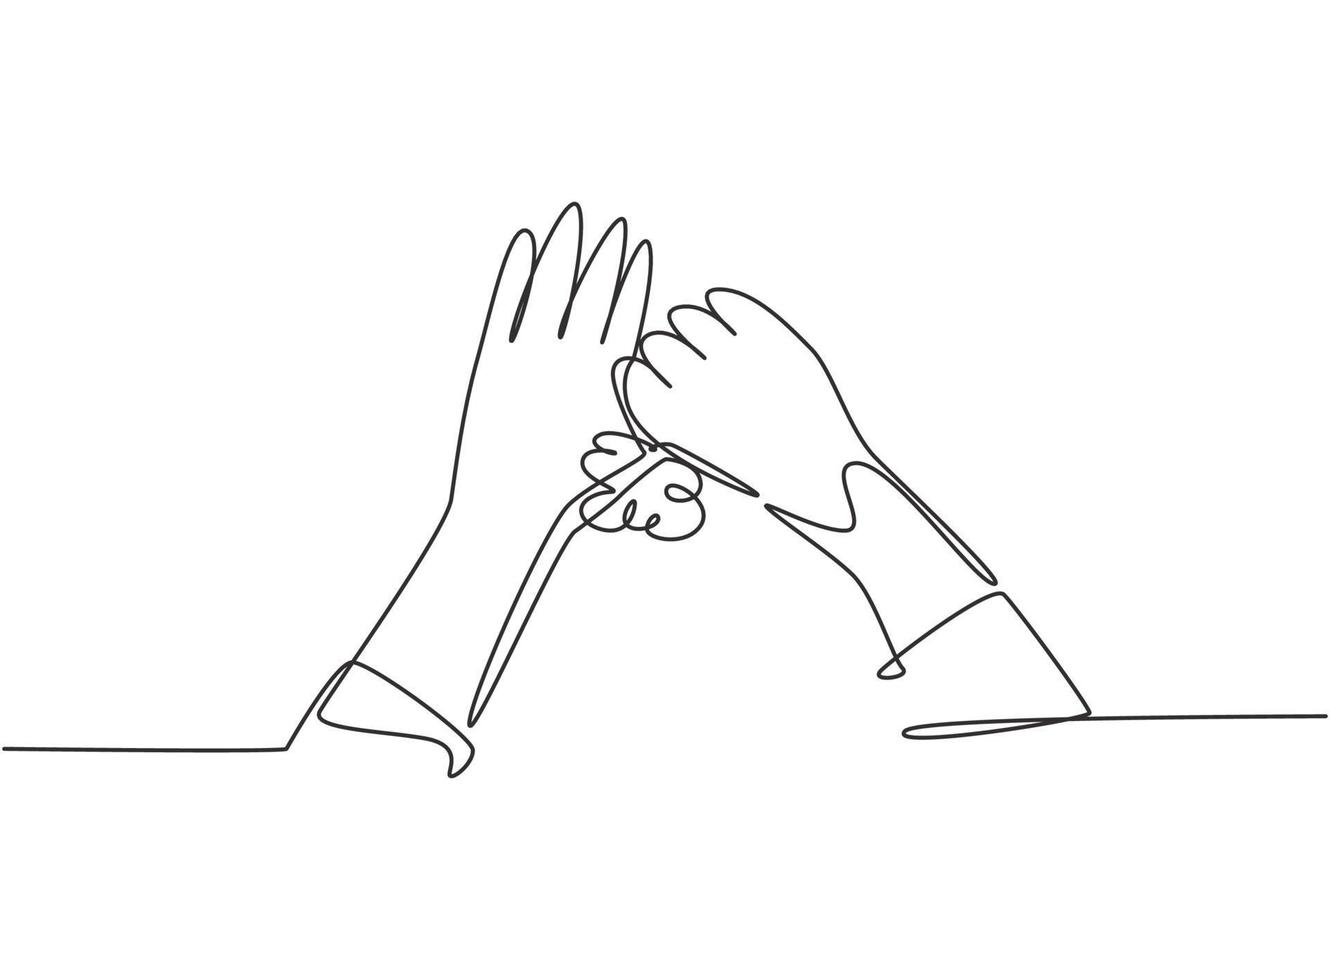 Single continuous line drawing twelve steps hand washing by rubbing the thumbs with soap and water flow until clean. Fingers become clean and hygienic. One line draw graphic design vector illustration